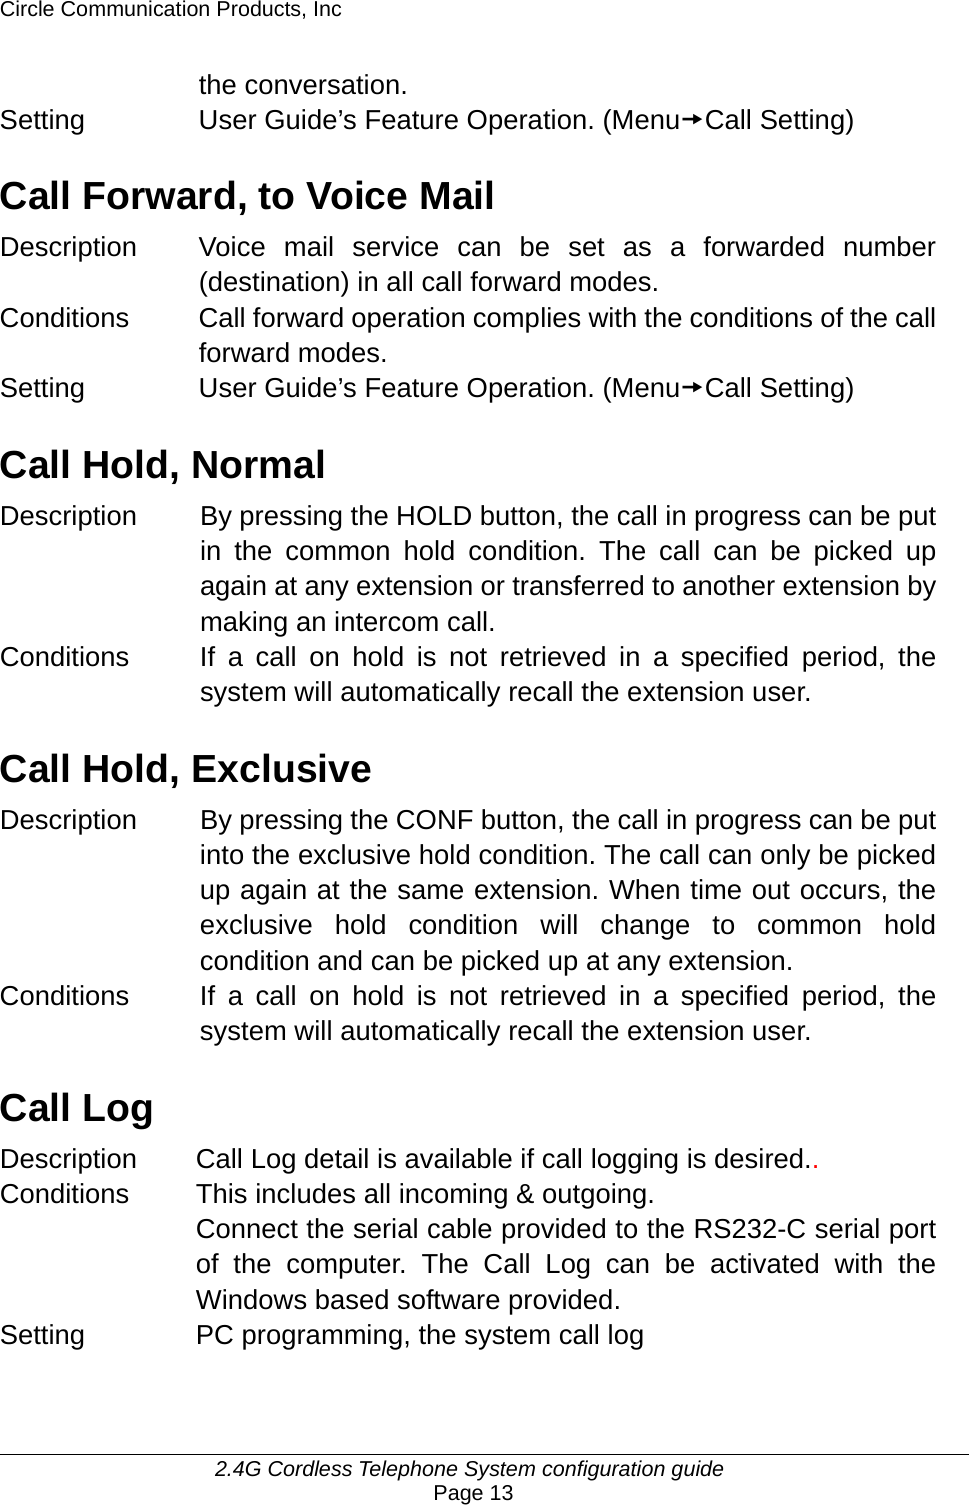 Circle Communication Products, Inc     2.4G Cordless Telephone System configuration guide Page 13 the conversation.   Setting  User Guide’s Feature Operation. (MenutCall Setting)  Call Forward, to Voice Mail Description  Voice mail service can be set as a forwarded number (destination) in all call forward modes. Conditions  Call forward operation complies with the conditions of the call forward modes. Setting  User Guide’s Feature Operation. (MenutCall Setting)  Call Hold, Normal Description  By pressing the HOLD button, the call in progress can be put in the common hold condition. The call can be picked up again at any extension or transferred to another extension by making an intercom call. Conditions  If a call on hold is not retrieved in a specified period, the system will automatically recall the extension user.    Call Hold, Exclusive Description  By pressing the CONF button, the call in progress can be put into the exclusive hold condition. The call can only be picked up again at the same extension. When time out occurs, the exclusive hold condition will change to common hold condition and can be picked up at any extension. Conditions  If a call on hold is not retrieved in a specified period, the system will automatically recall the extension user.    Call Log Description Call Log detail is available if call logging is desired.. Conditions This includes all incoming &amp; outgoing.   Connect the serial cable provided to the RS232-C serial port of the computer. The Call Log can be activated with the Windows based software provided. Setting PC programming, the system call log  